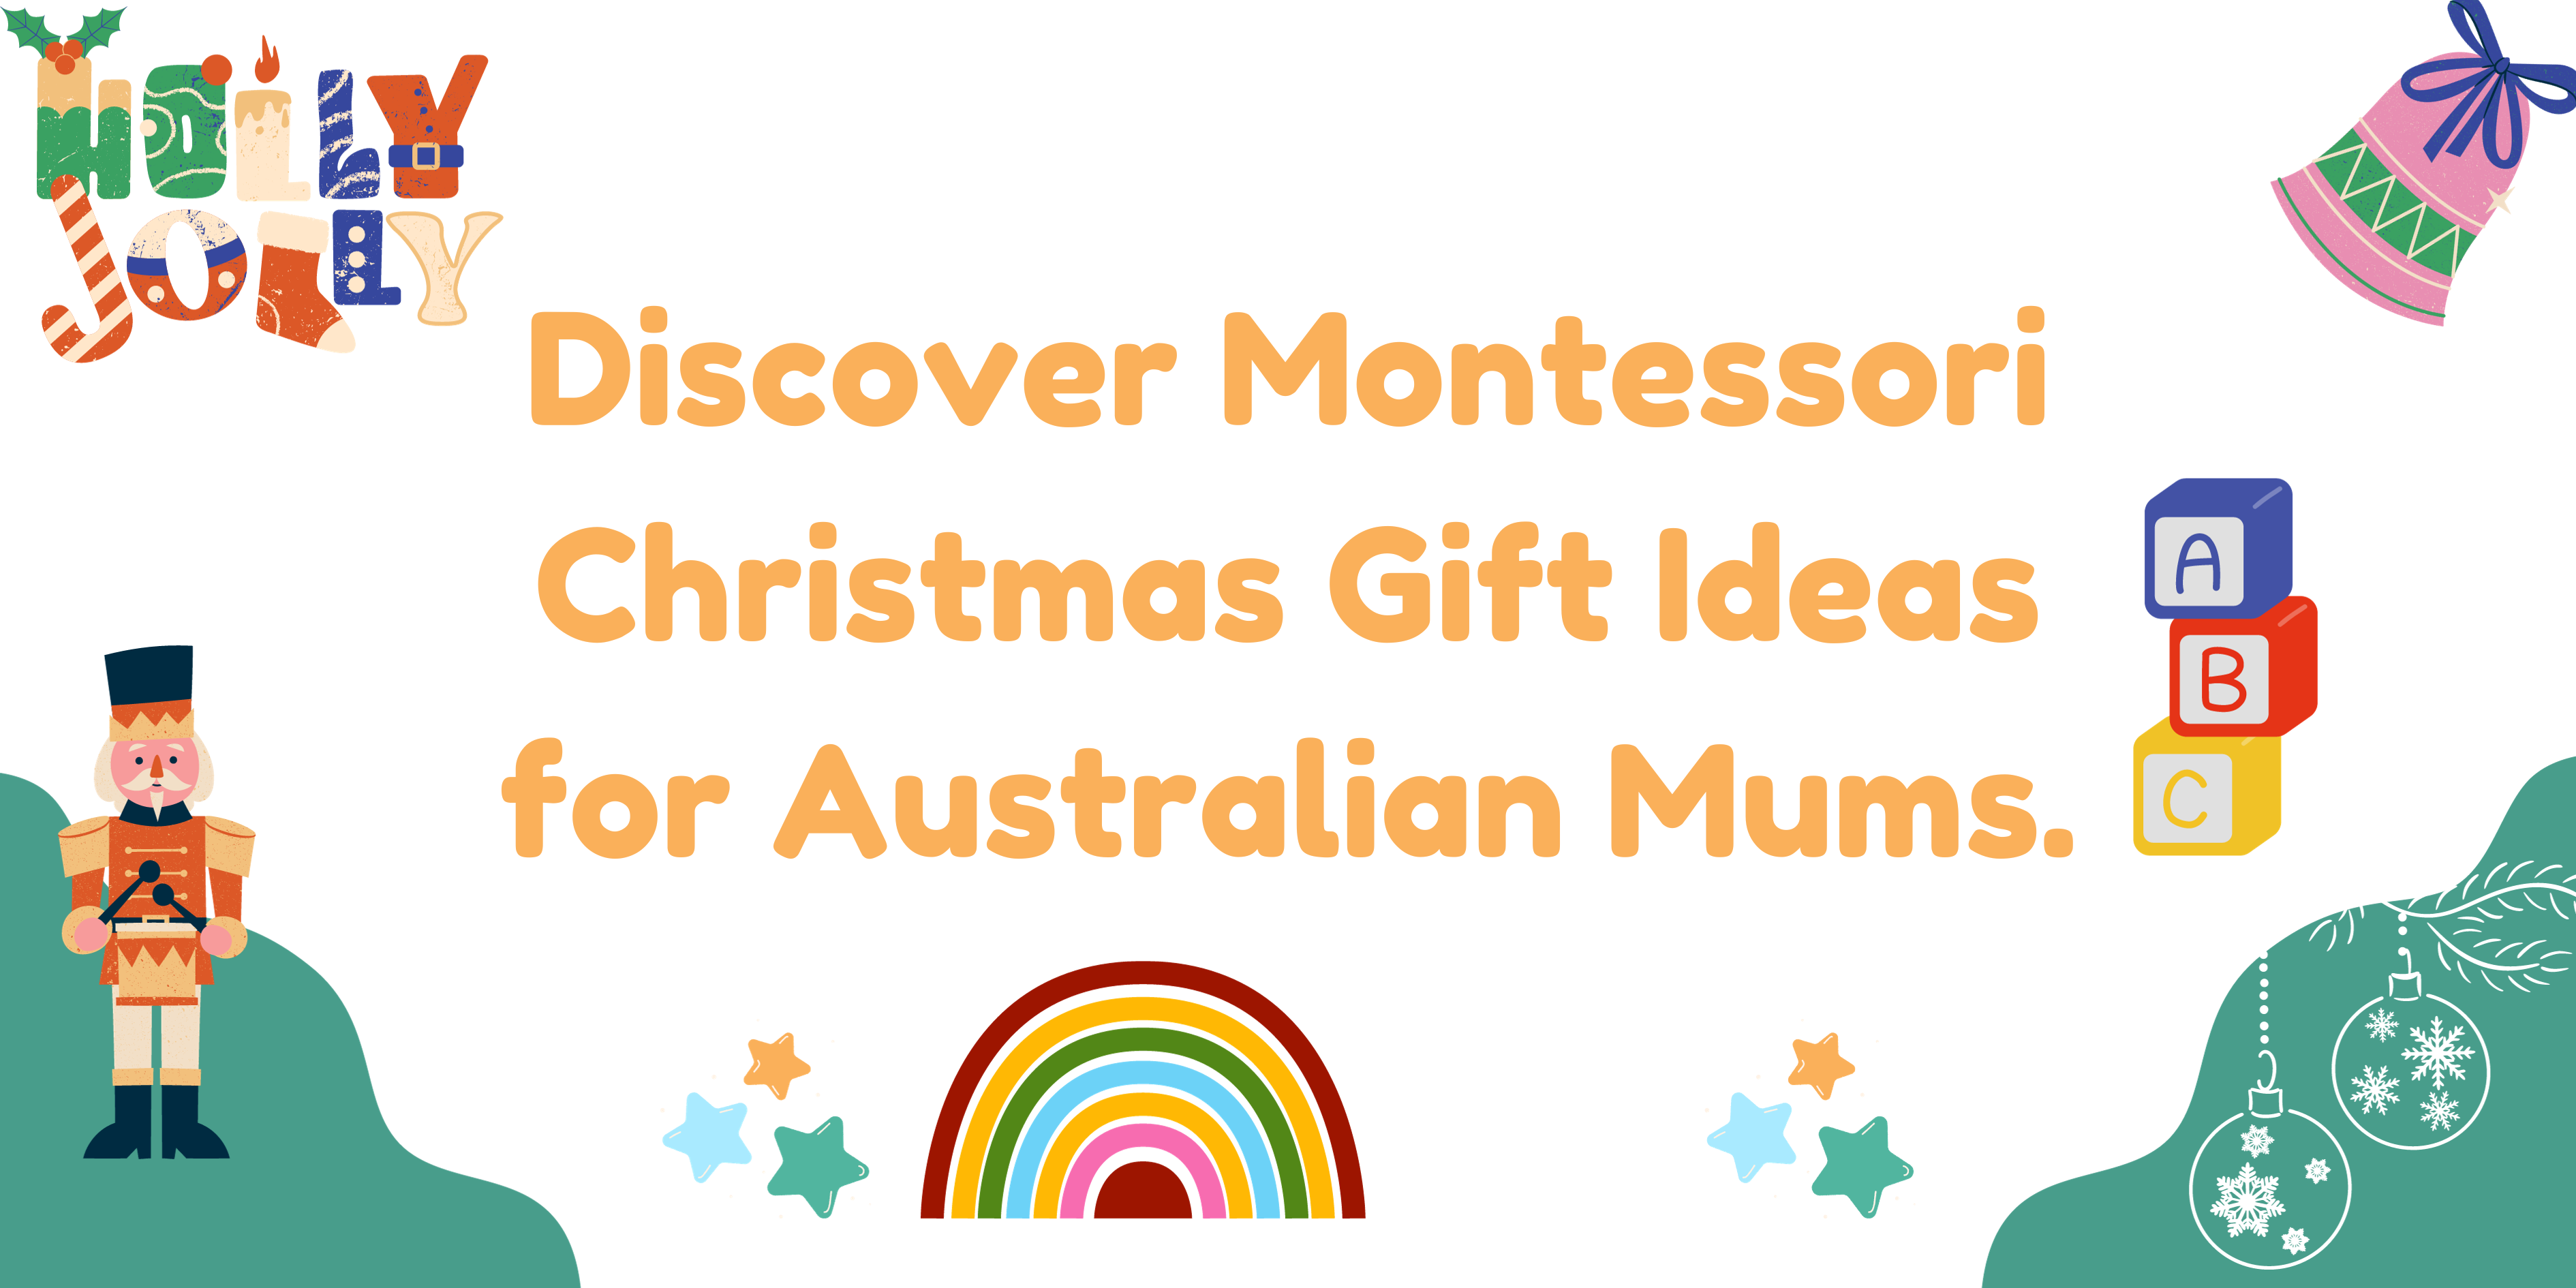 An Aussie Montessori Christmas gifts: Where Tradition Meets Exploration